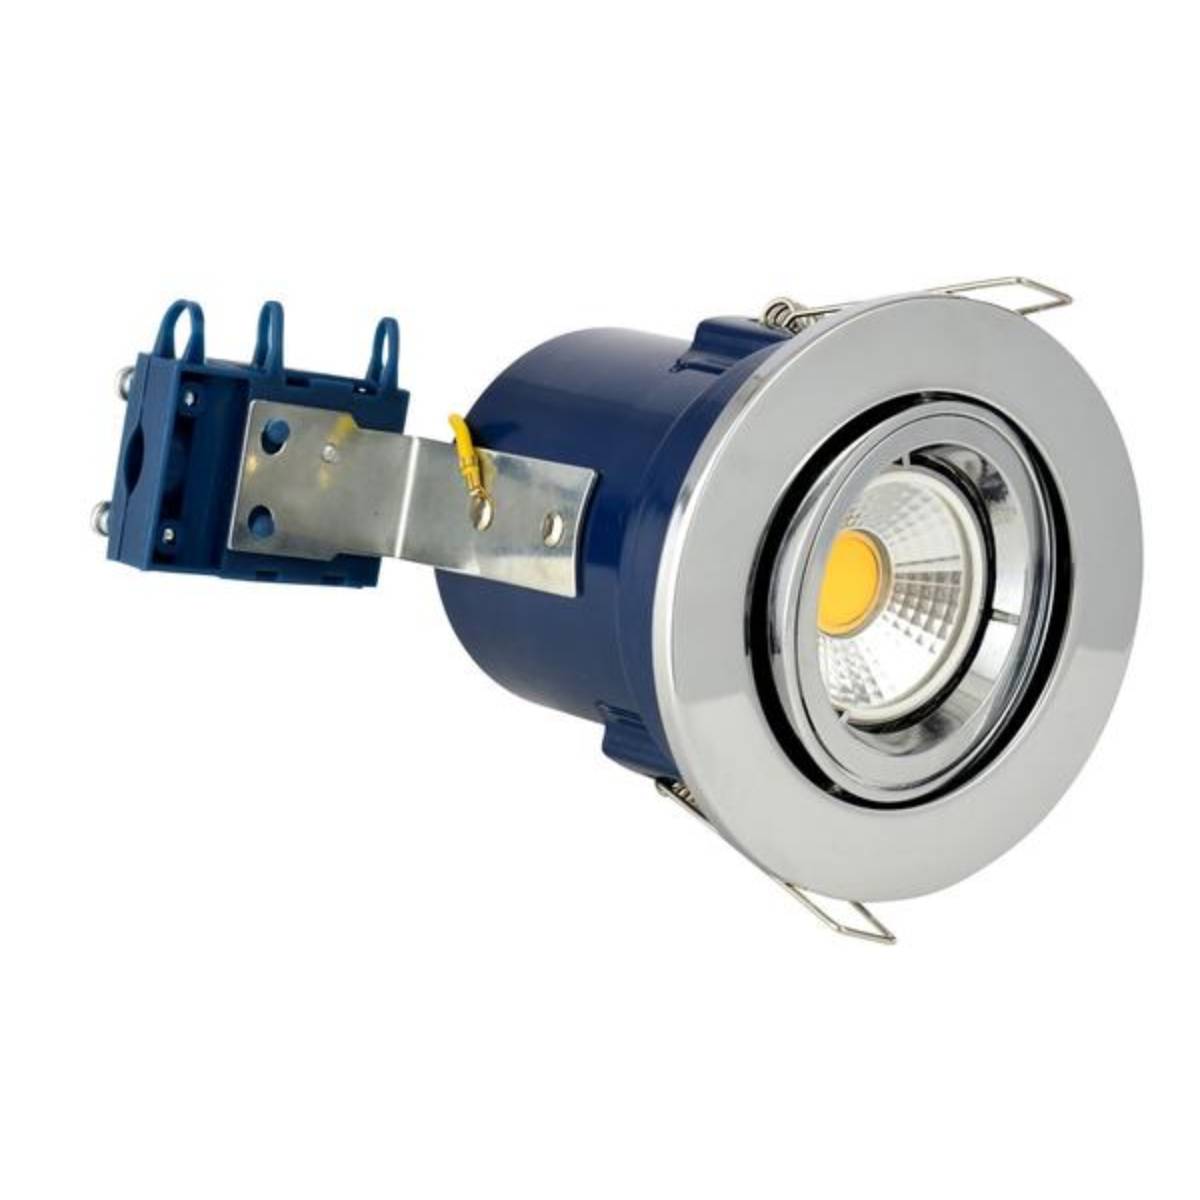 Forum Electralite ELA-27466-CHR Yate Fixed Fire Rated Adjustable Downlight - Chrome (11951)